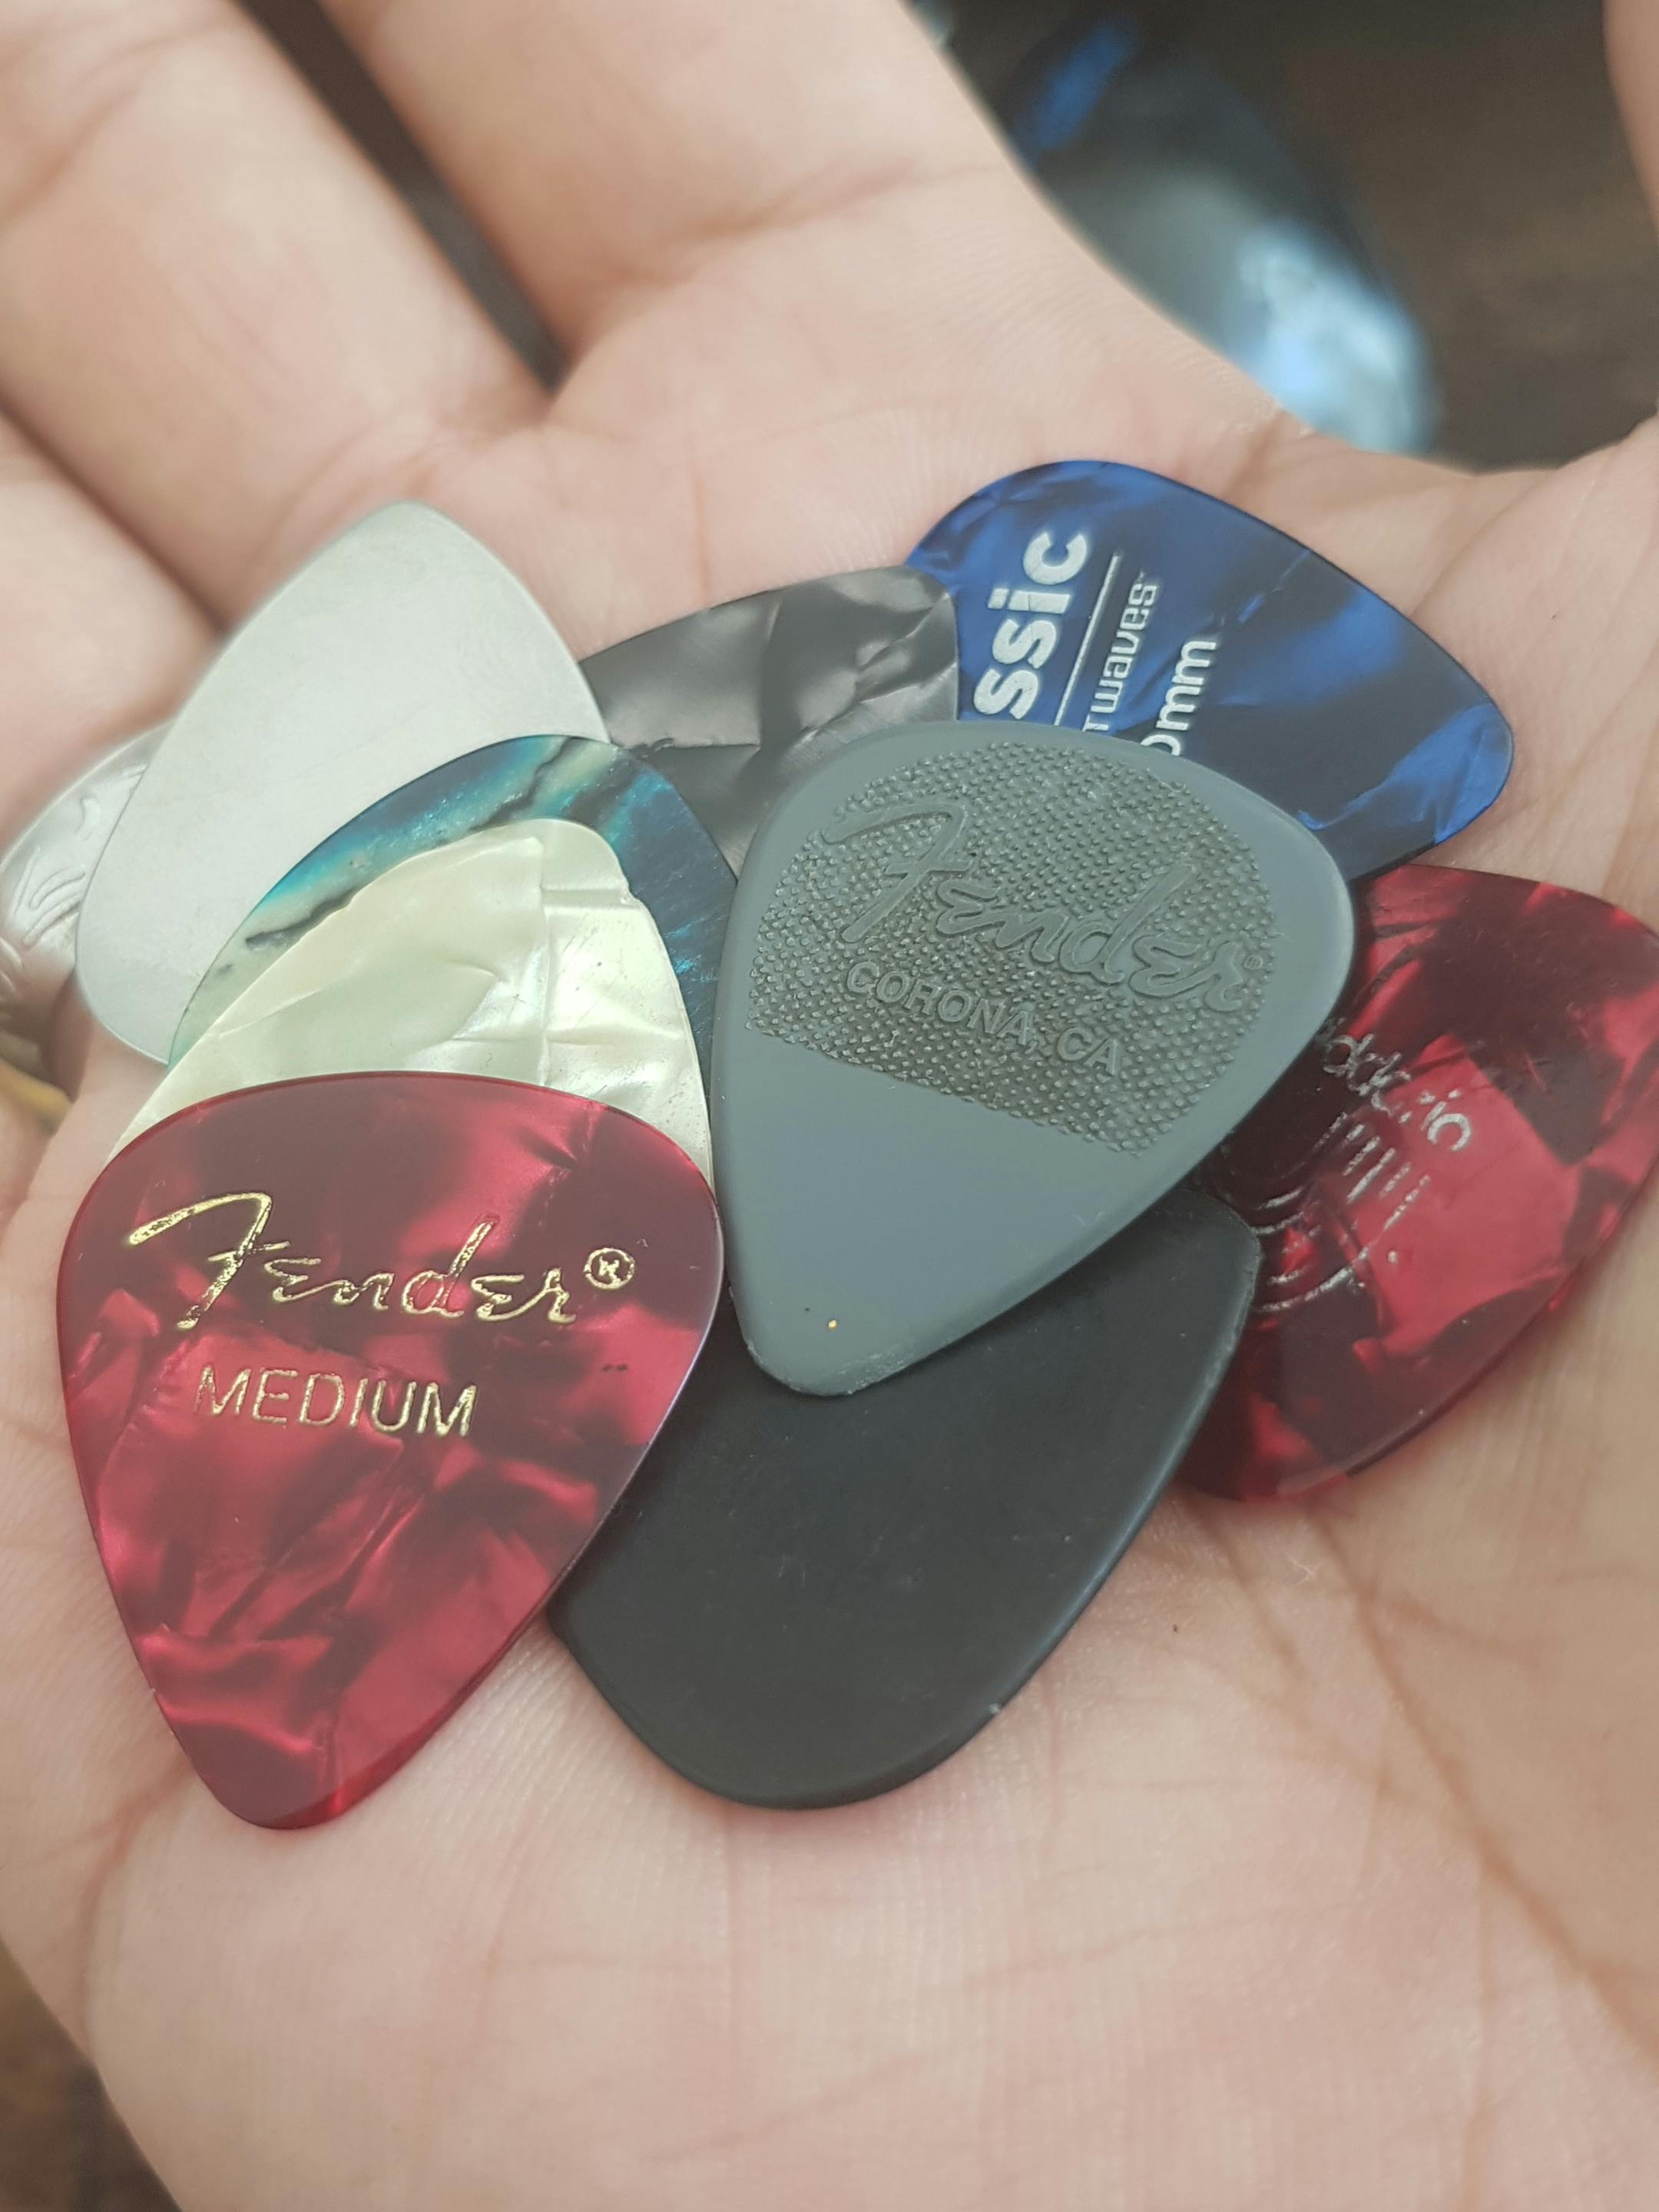 Image result for guitar pick free stock photos